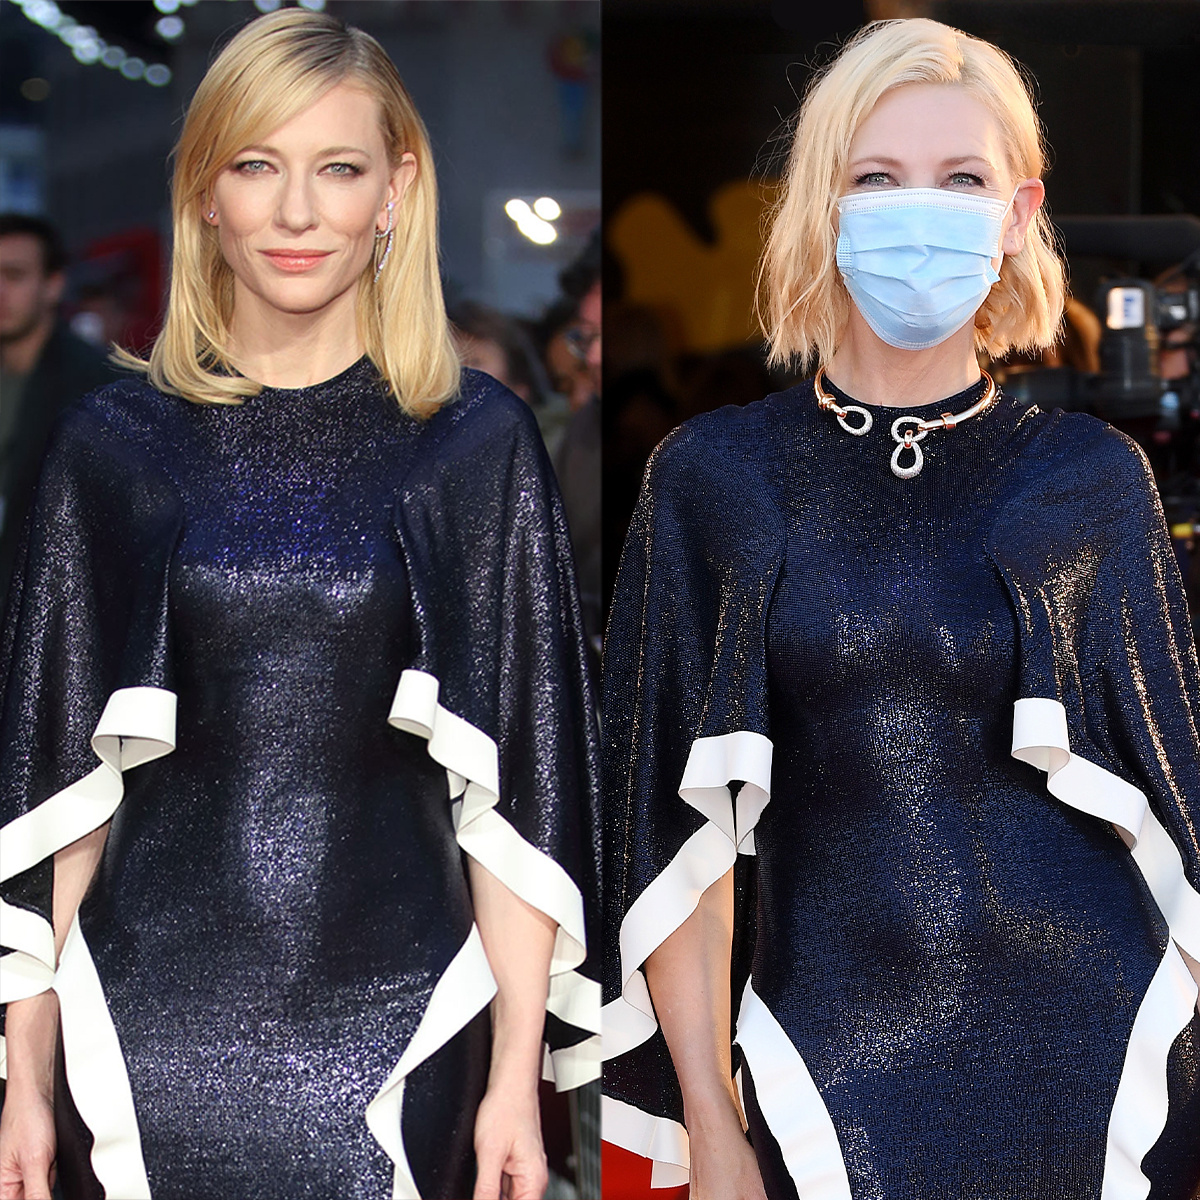 She can wear anything! Cate Blanchett dons unusual dress to Blue